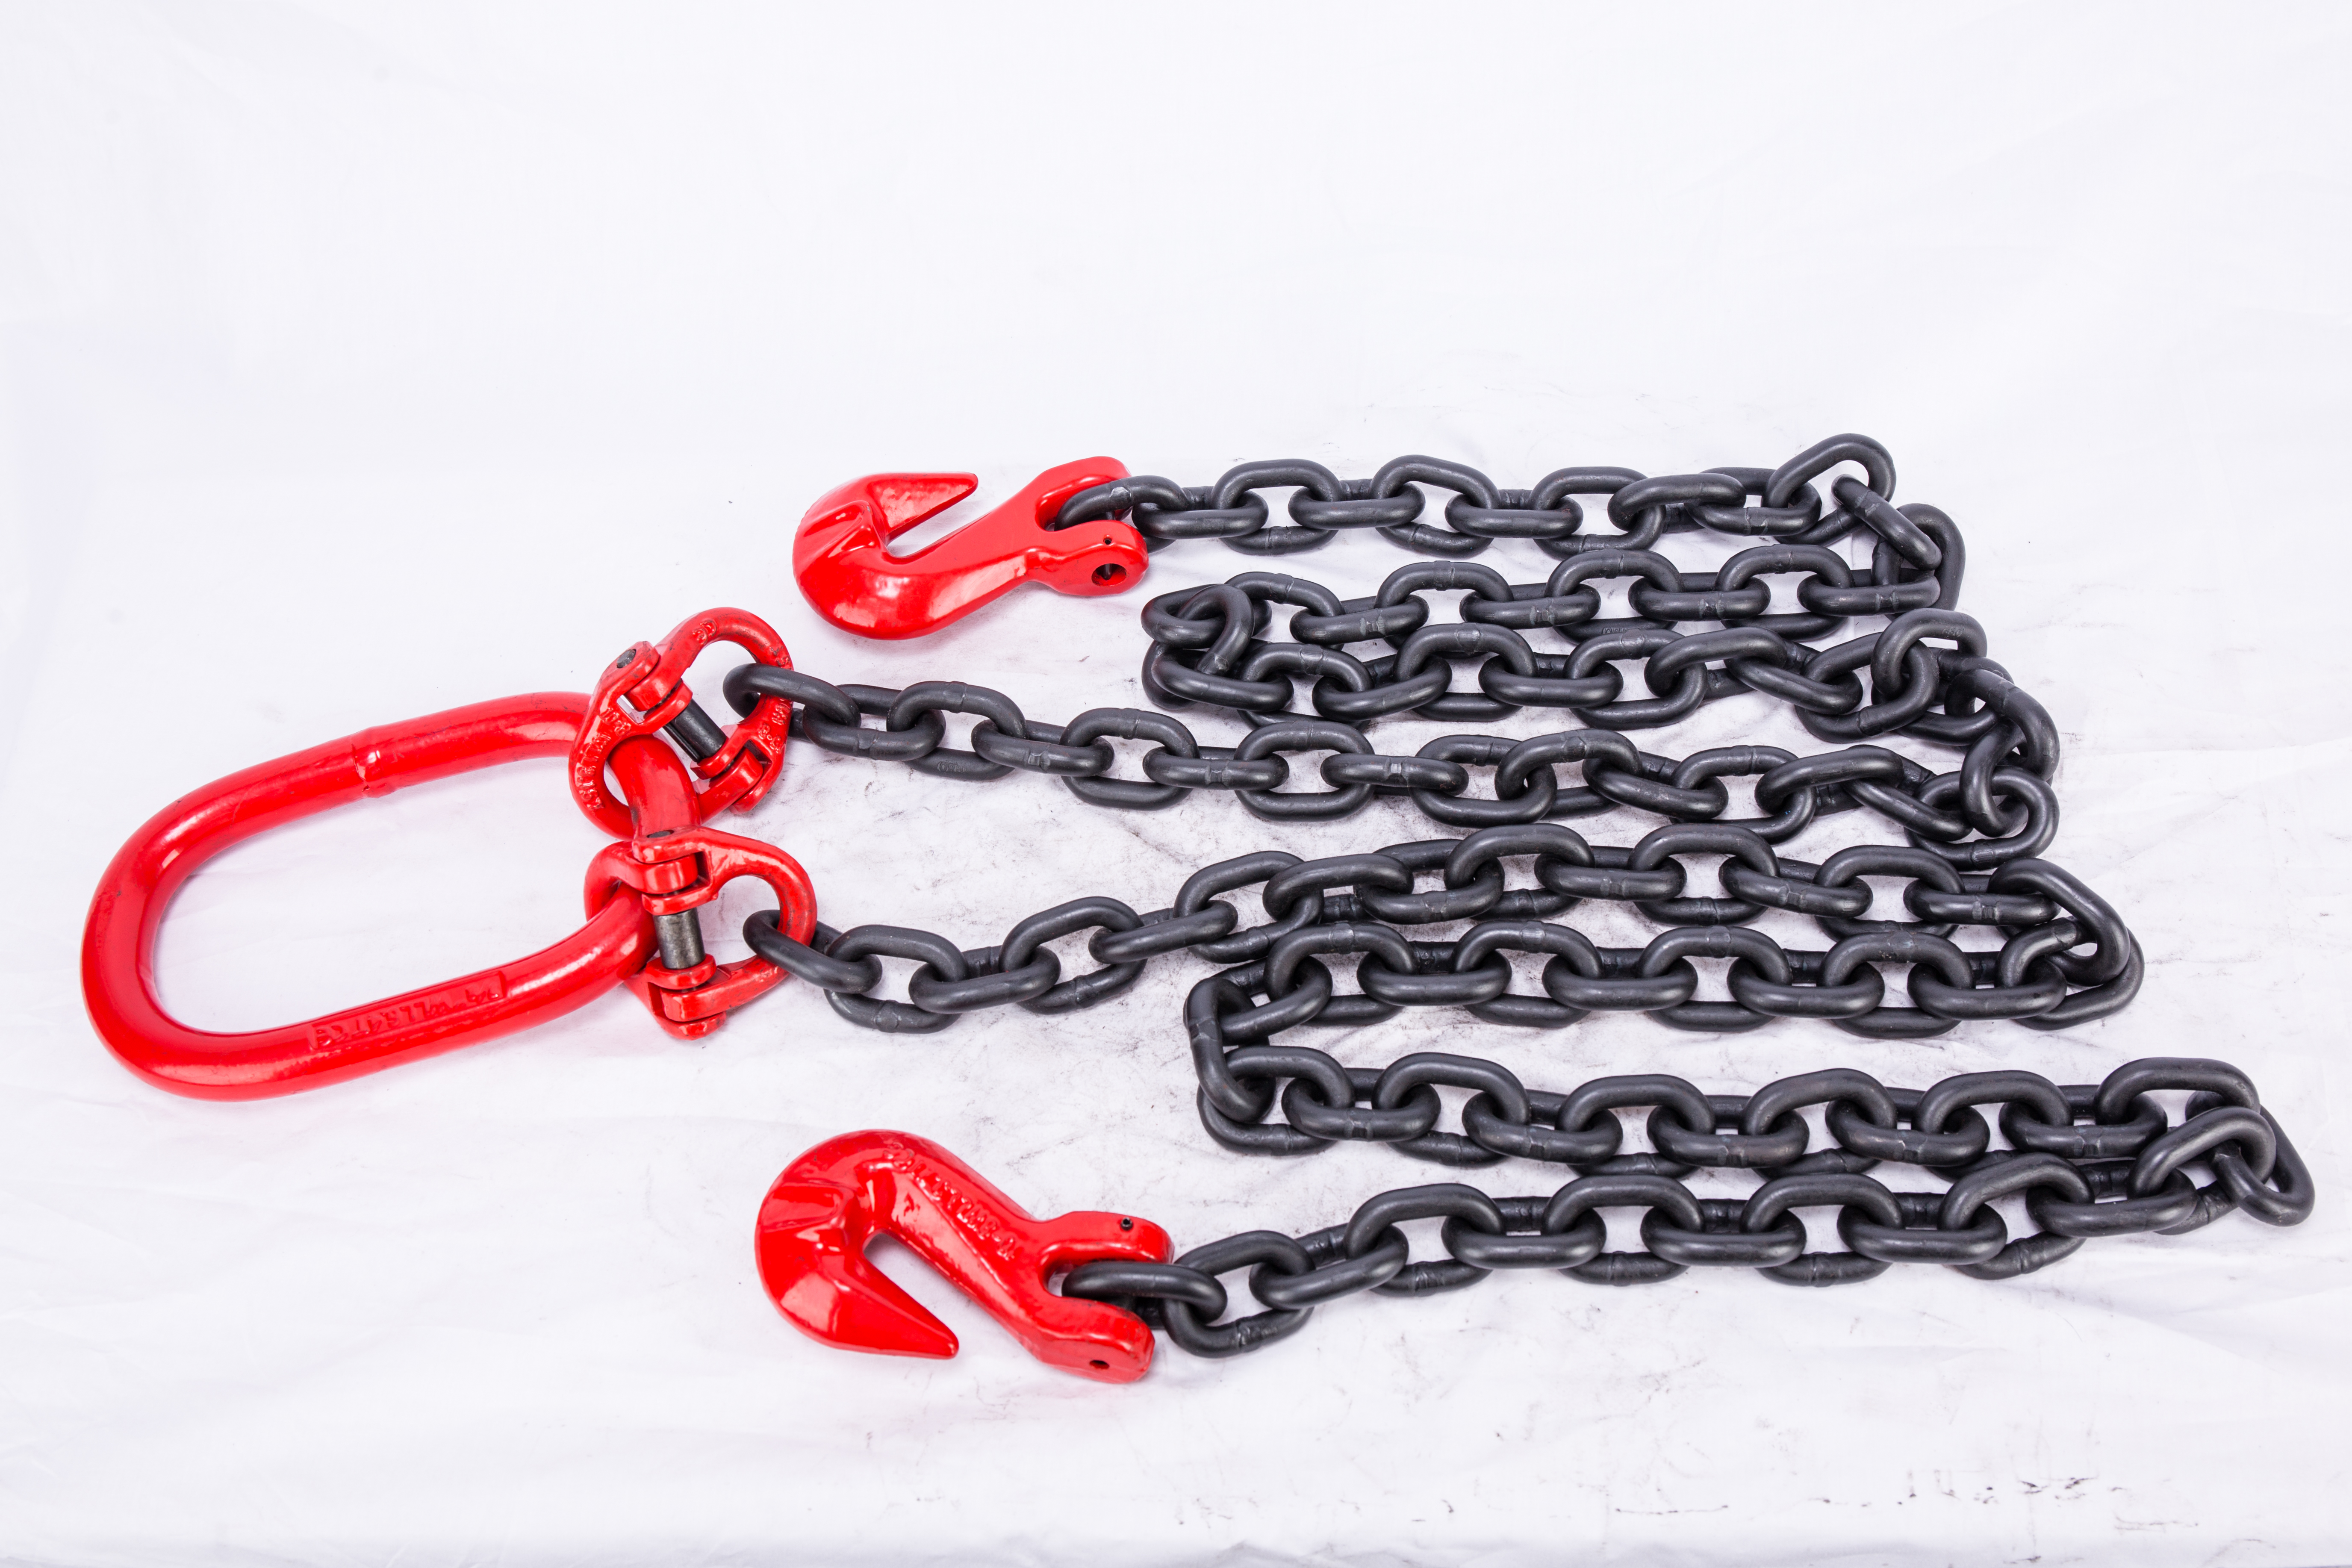 G80 chain rigging Featured Image